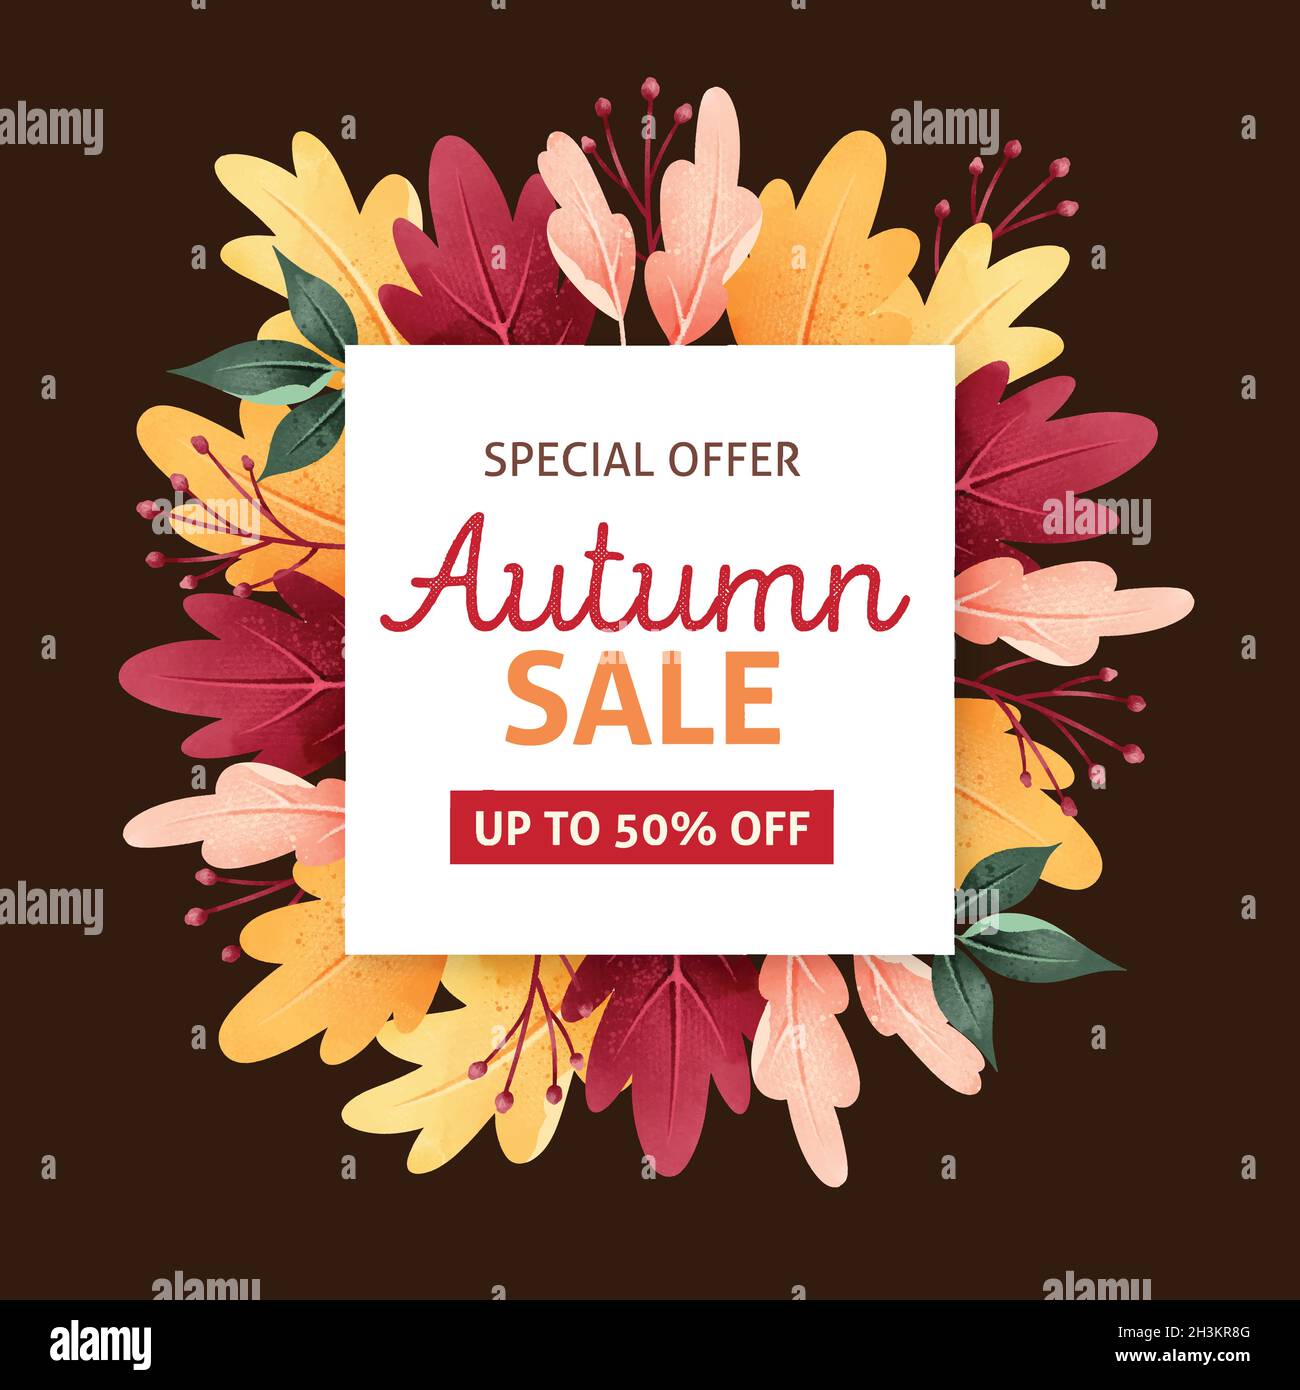 autumn sale mock up with dried foliage vector design illustration Stock Vector